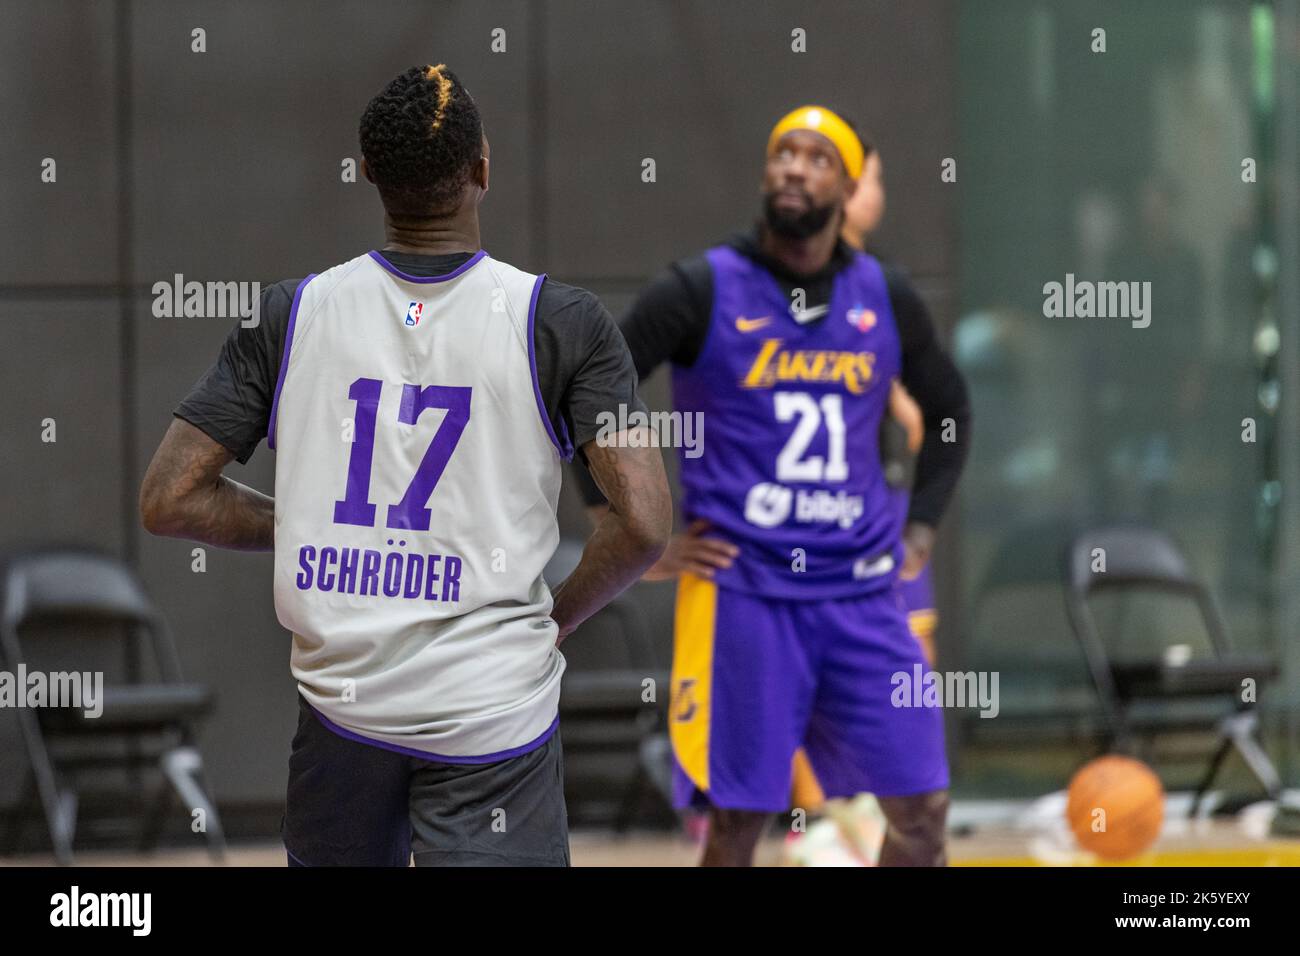 lakers practice jersey 2022